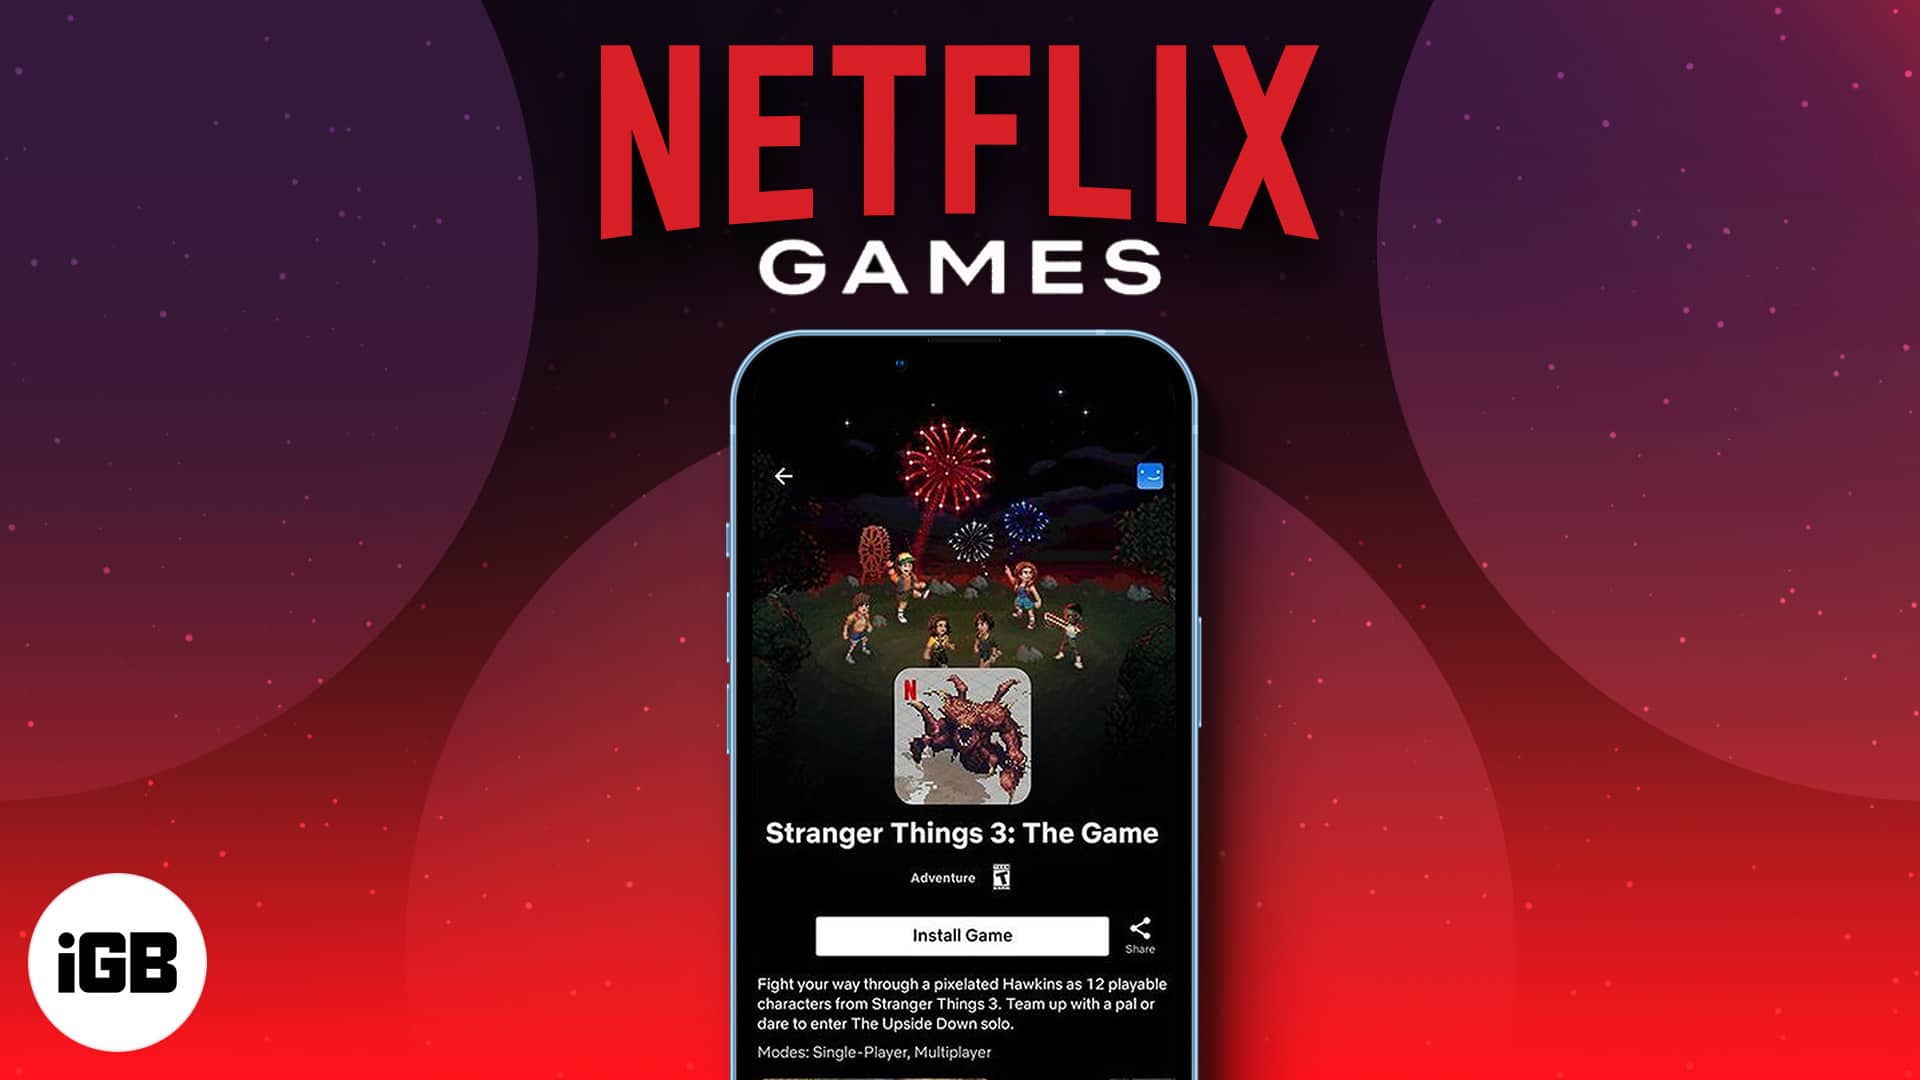 How to Find, Download, and Play Netflix Games on iPhone